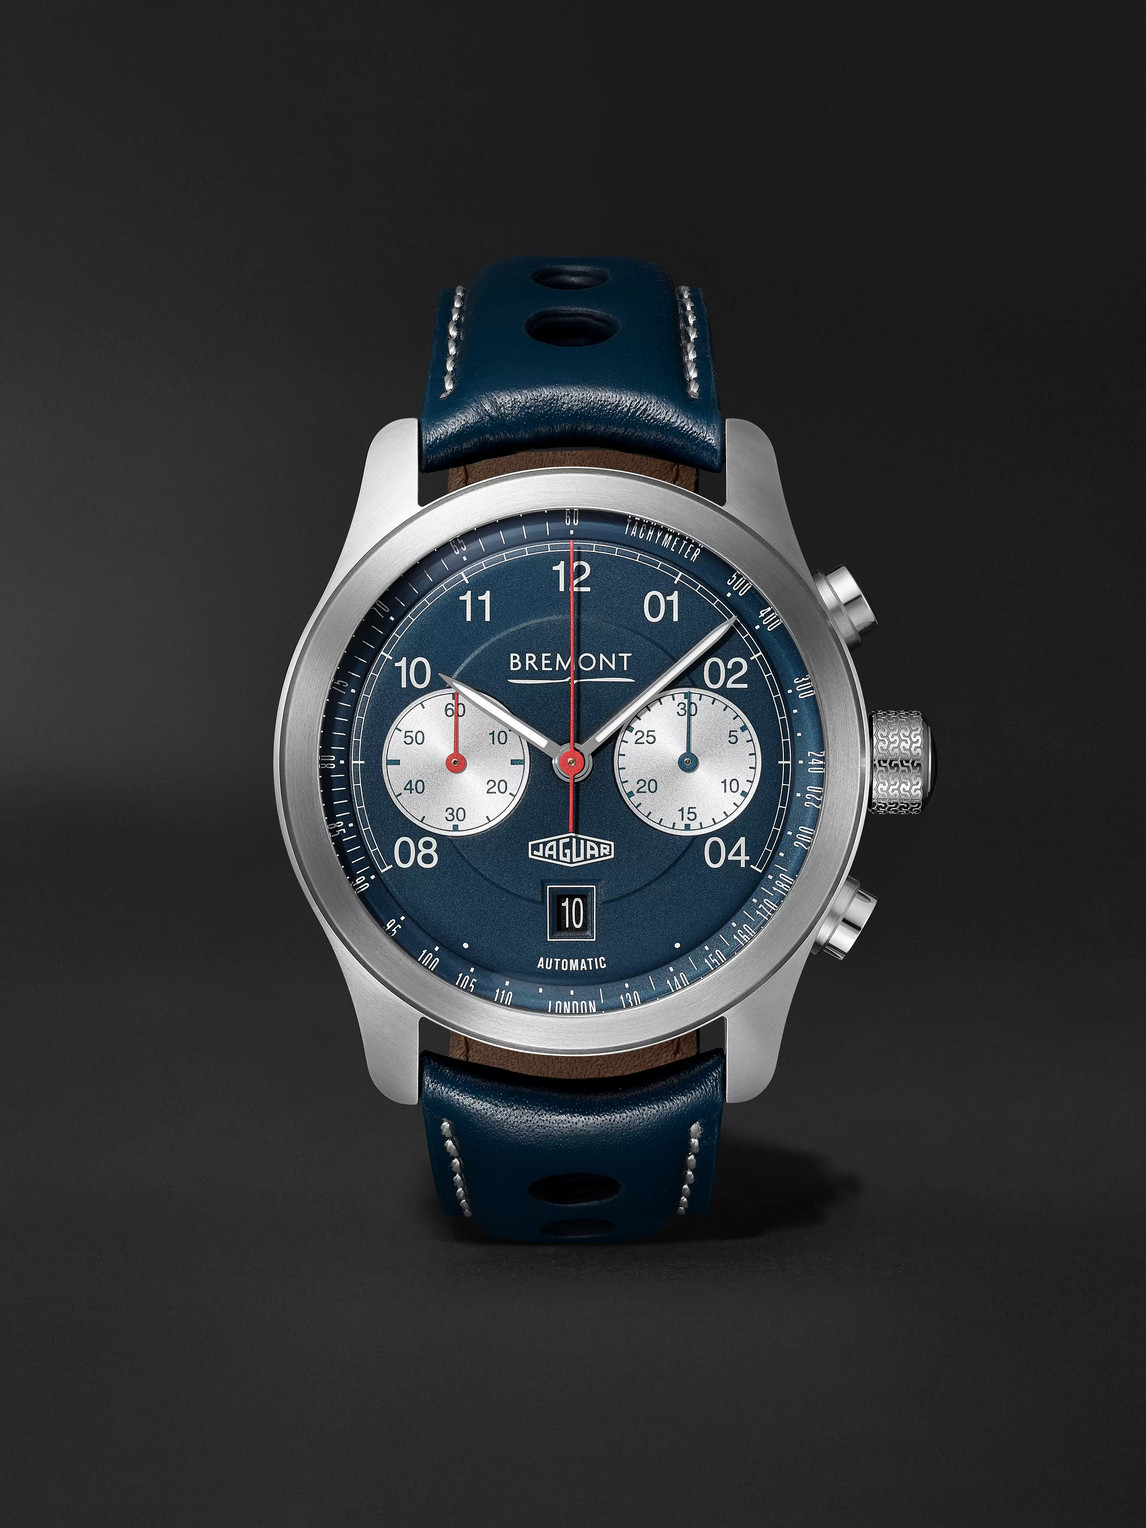 BREMONT JAGUAR D-TYPE LIMITED EDITION AUTOMATIC CHRONOGRAPH 43MM STAINLESS STEEL AND LEATHER WATCH, REF. NO.